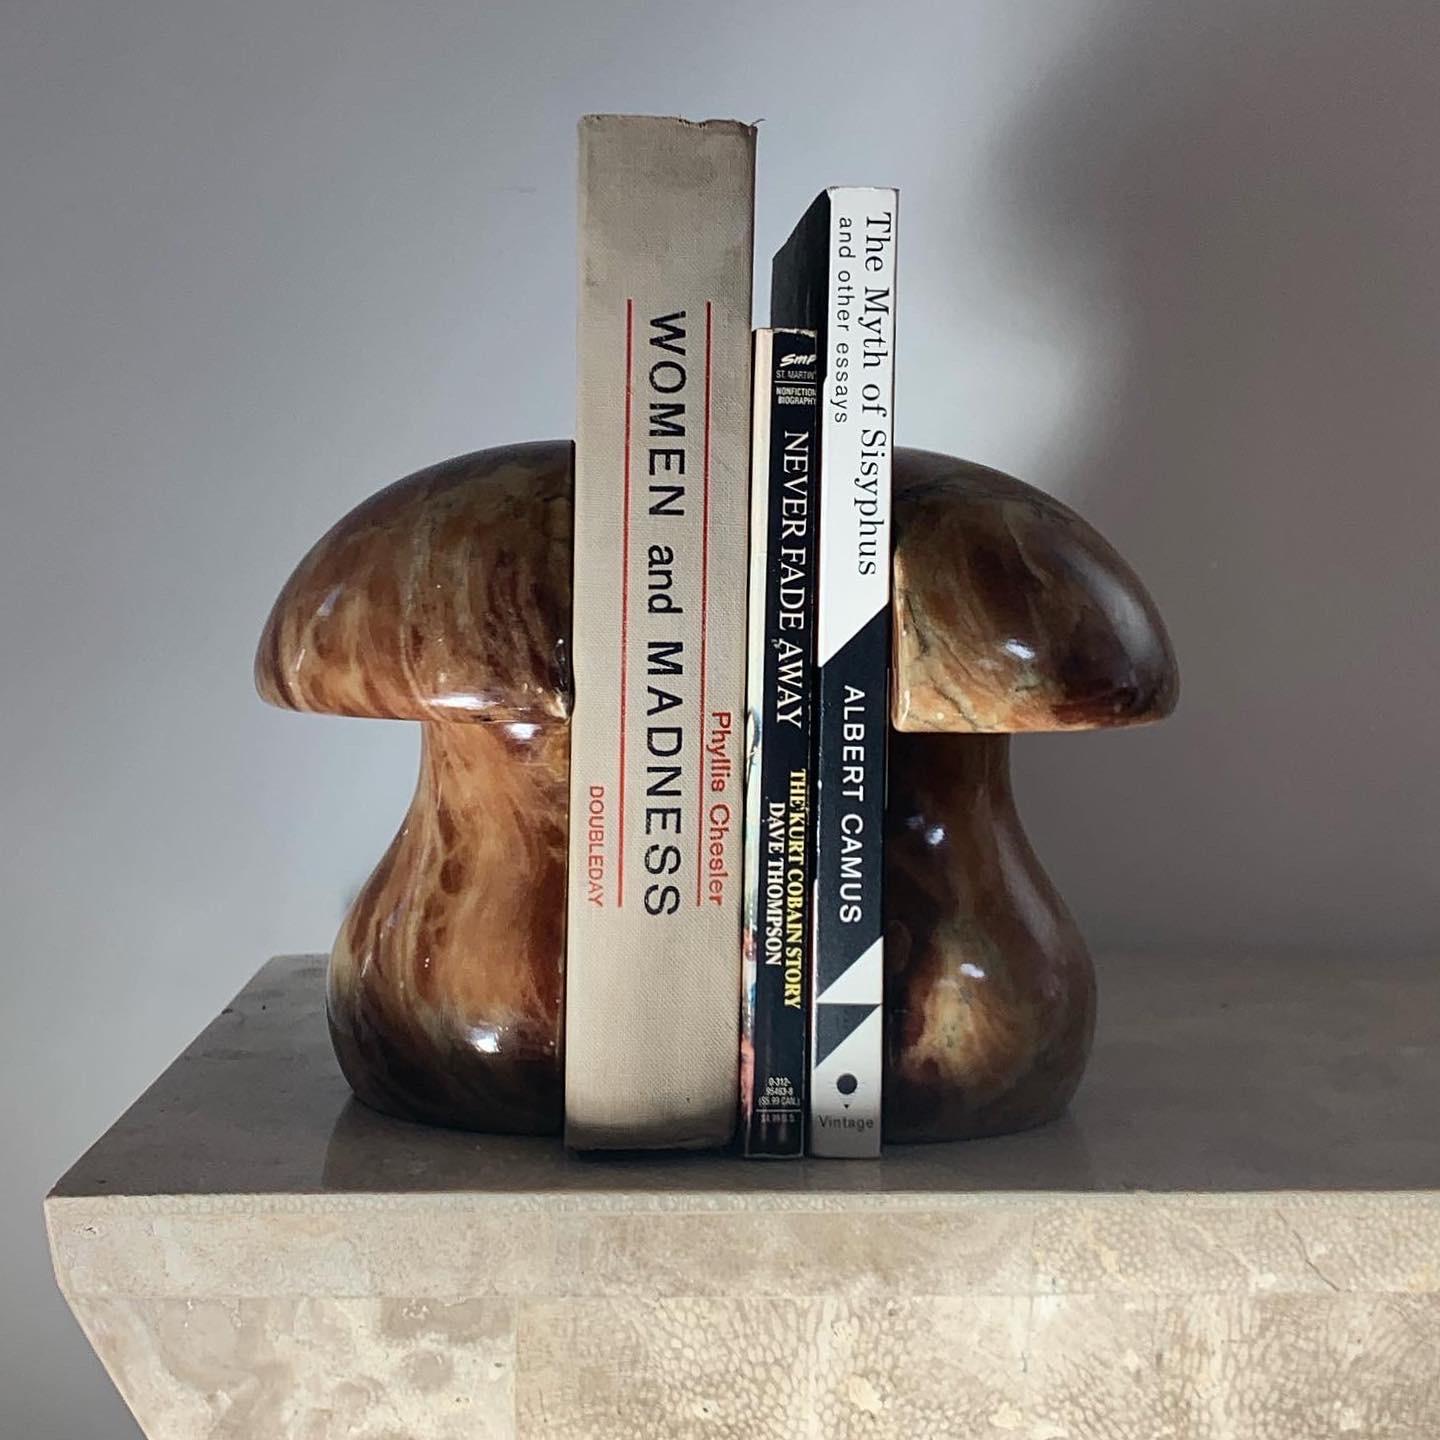 Pair of hand-carved alabaster marble mushroom bookends from Volterra, Italy by ABF. Tones of ochre, caramel, rust, and pewter. Minor losses but overall good condition considering age. 
Each bookend measures: 6” wide X 2.5” deep X 6” tall 
And when